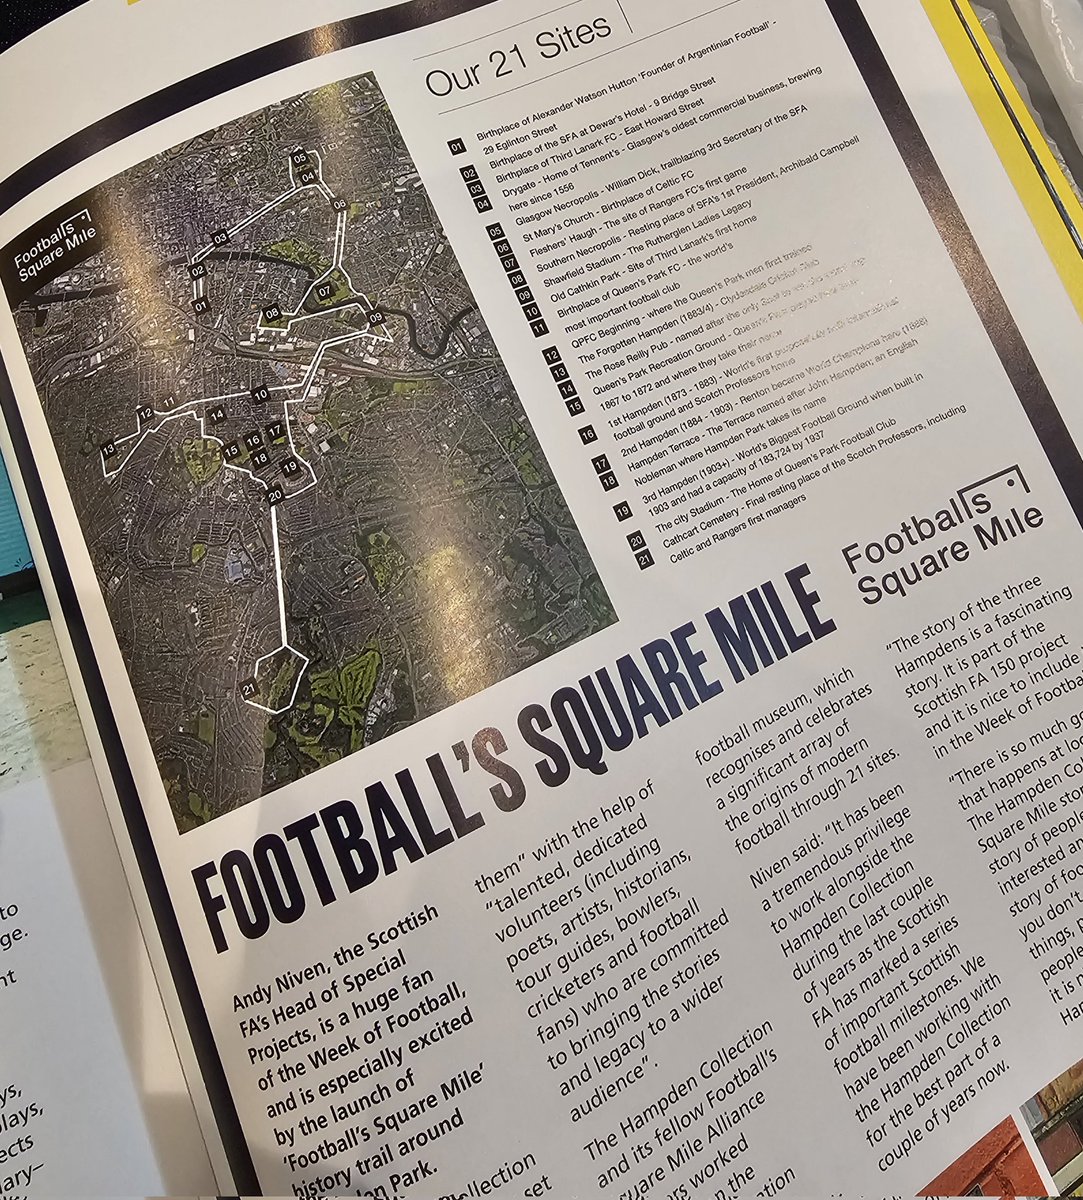 #Dare2Dream Here are two pictures from the programme for the 150th Year of the Scottish Cup Final. A beautiful keepsake, and so delighted to have an article about the 3 Hampdens and our amazing #FootballsSquareMile project featured. Restore It, Protect It, Promote It. 🌳